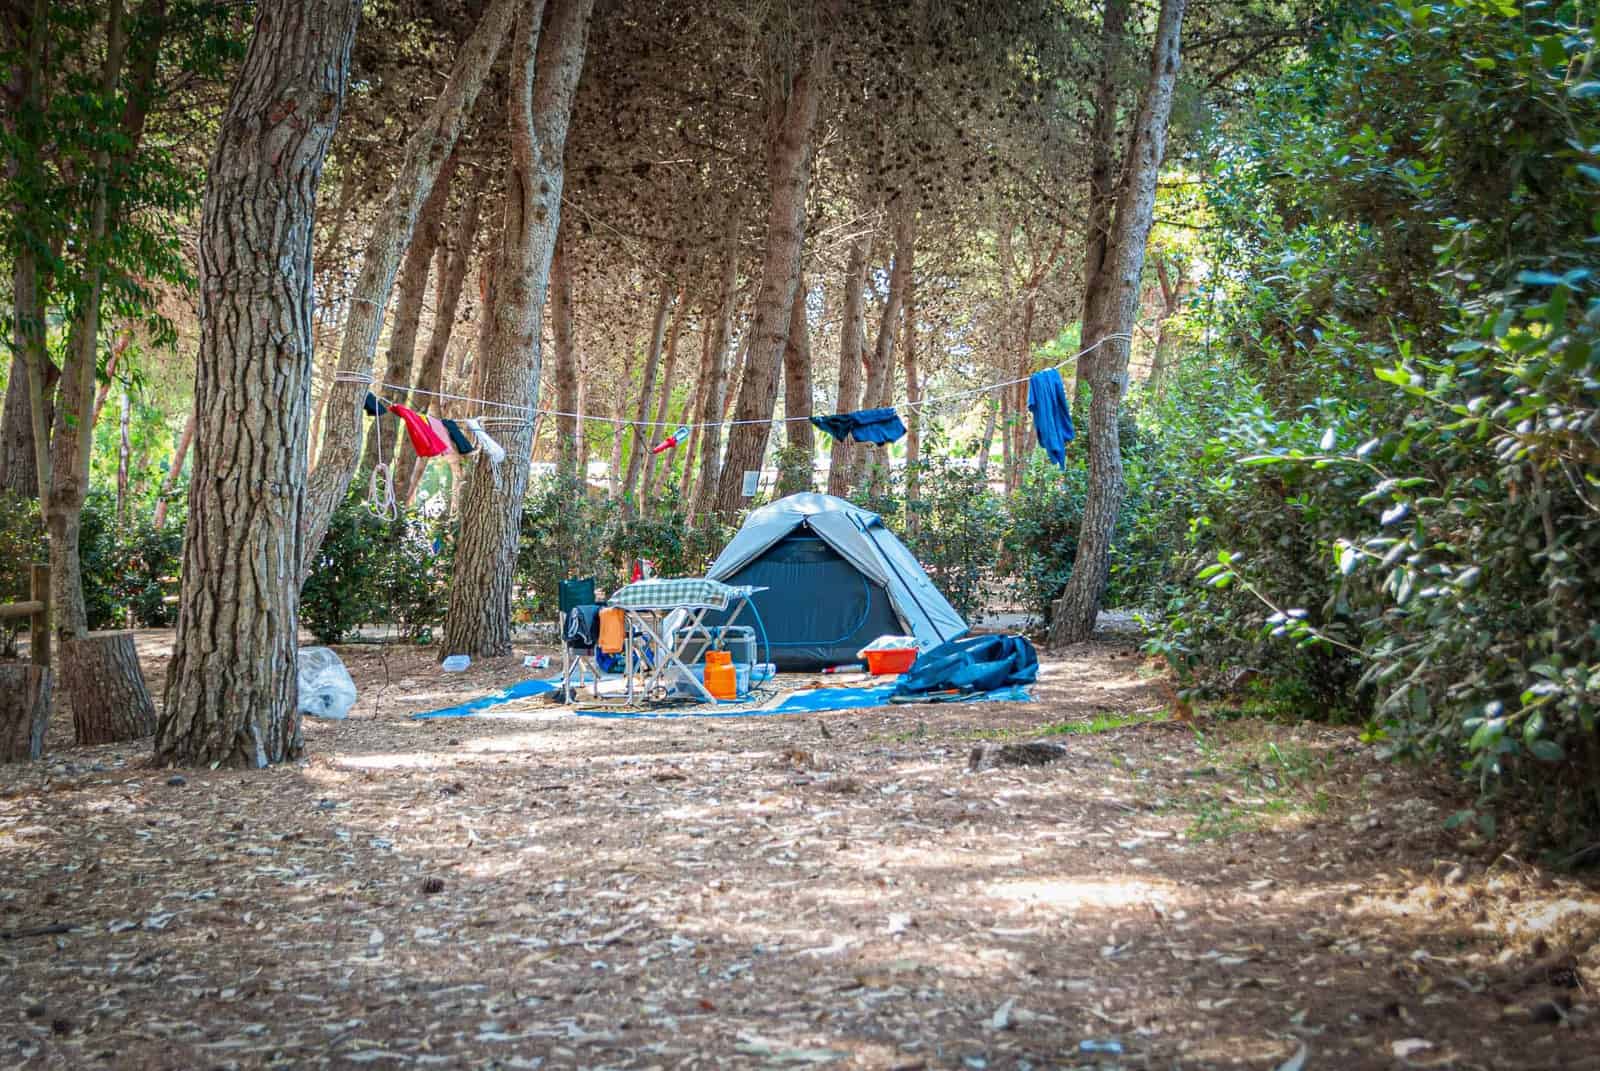 Camping in salento tents